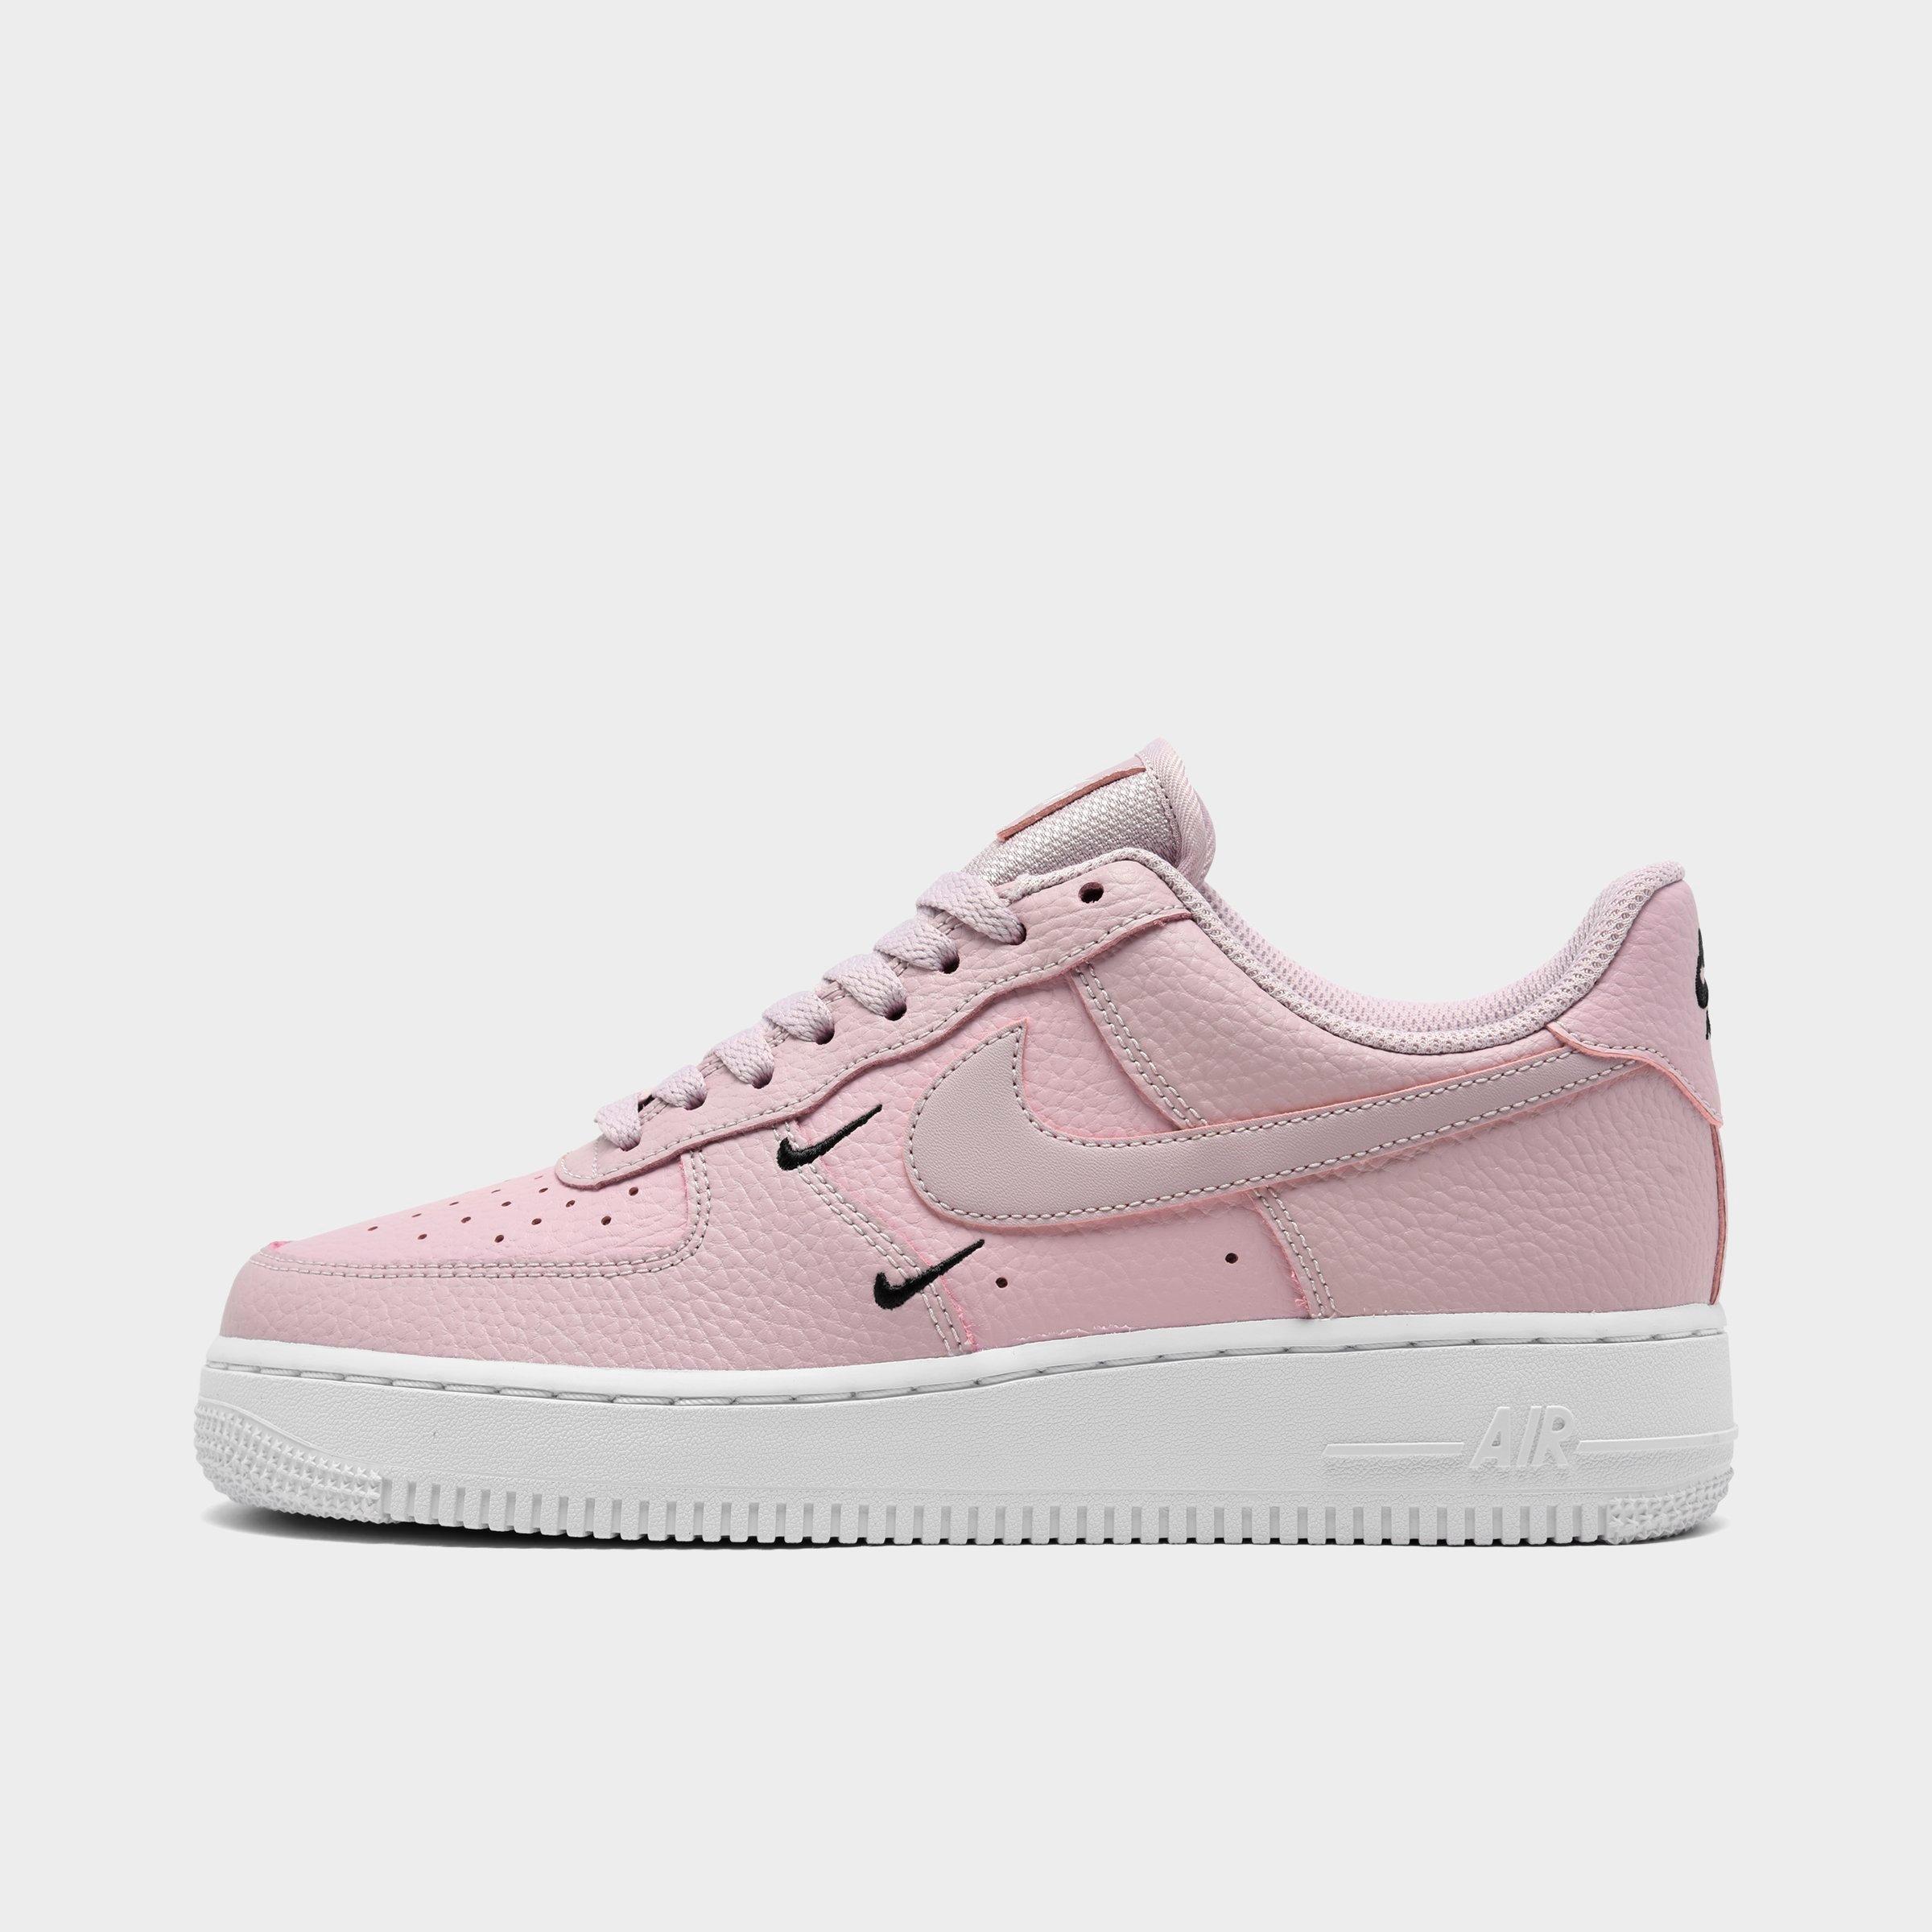 air force ones women's